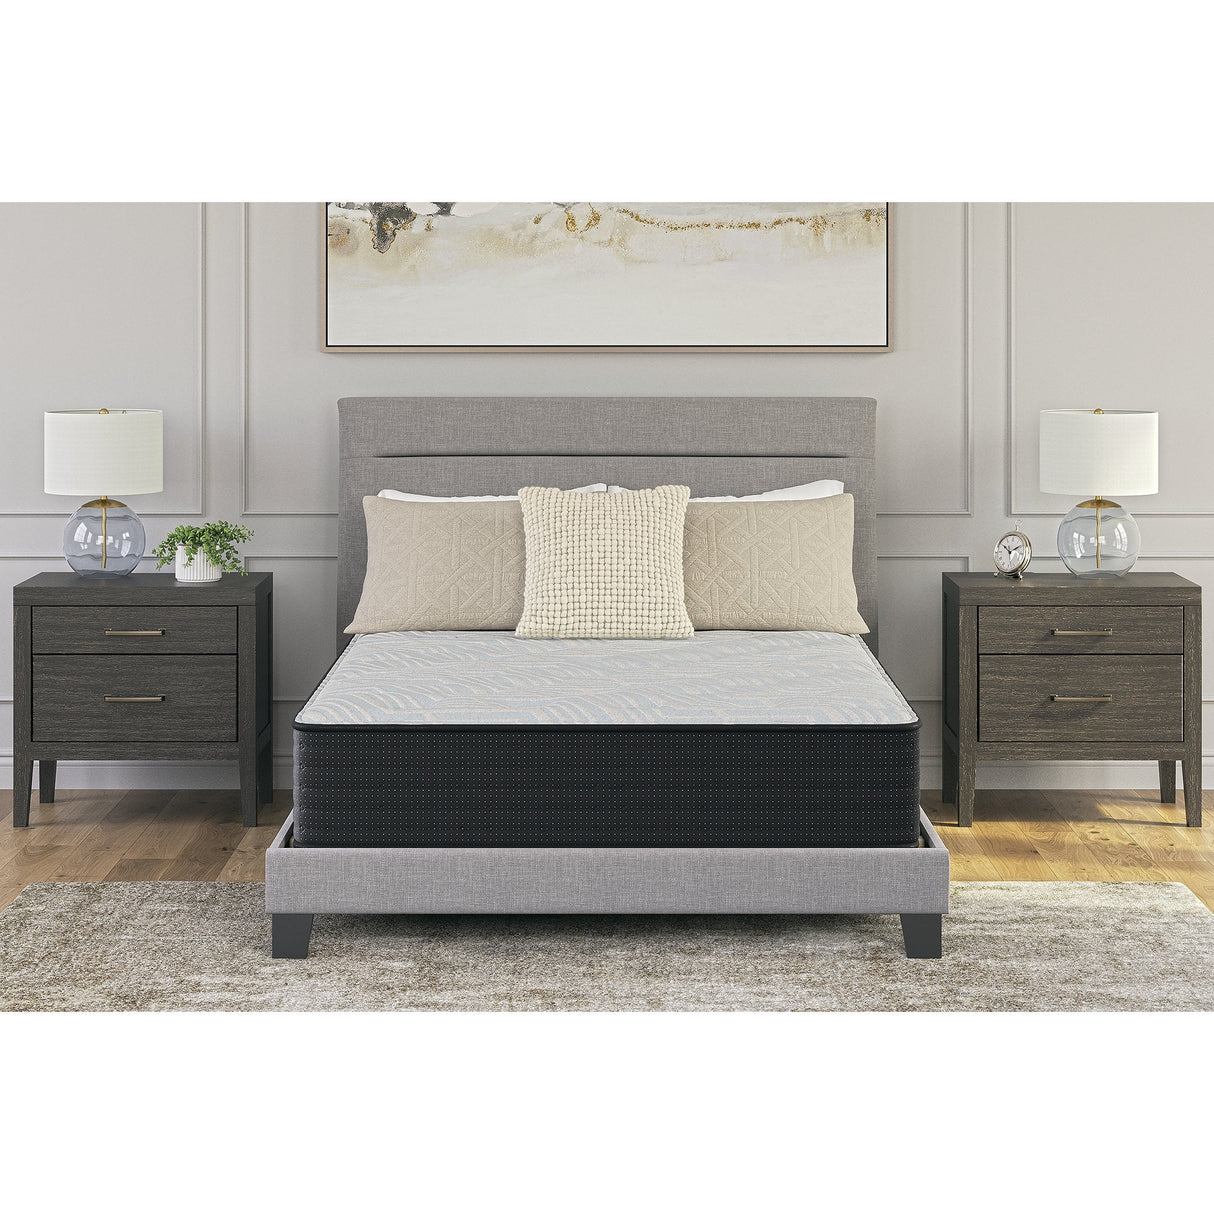 Signature Design by Ashley Palisades Firm King Mattress Gray/Blue